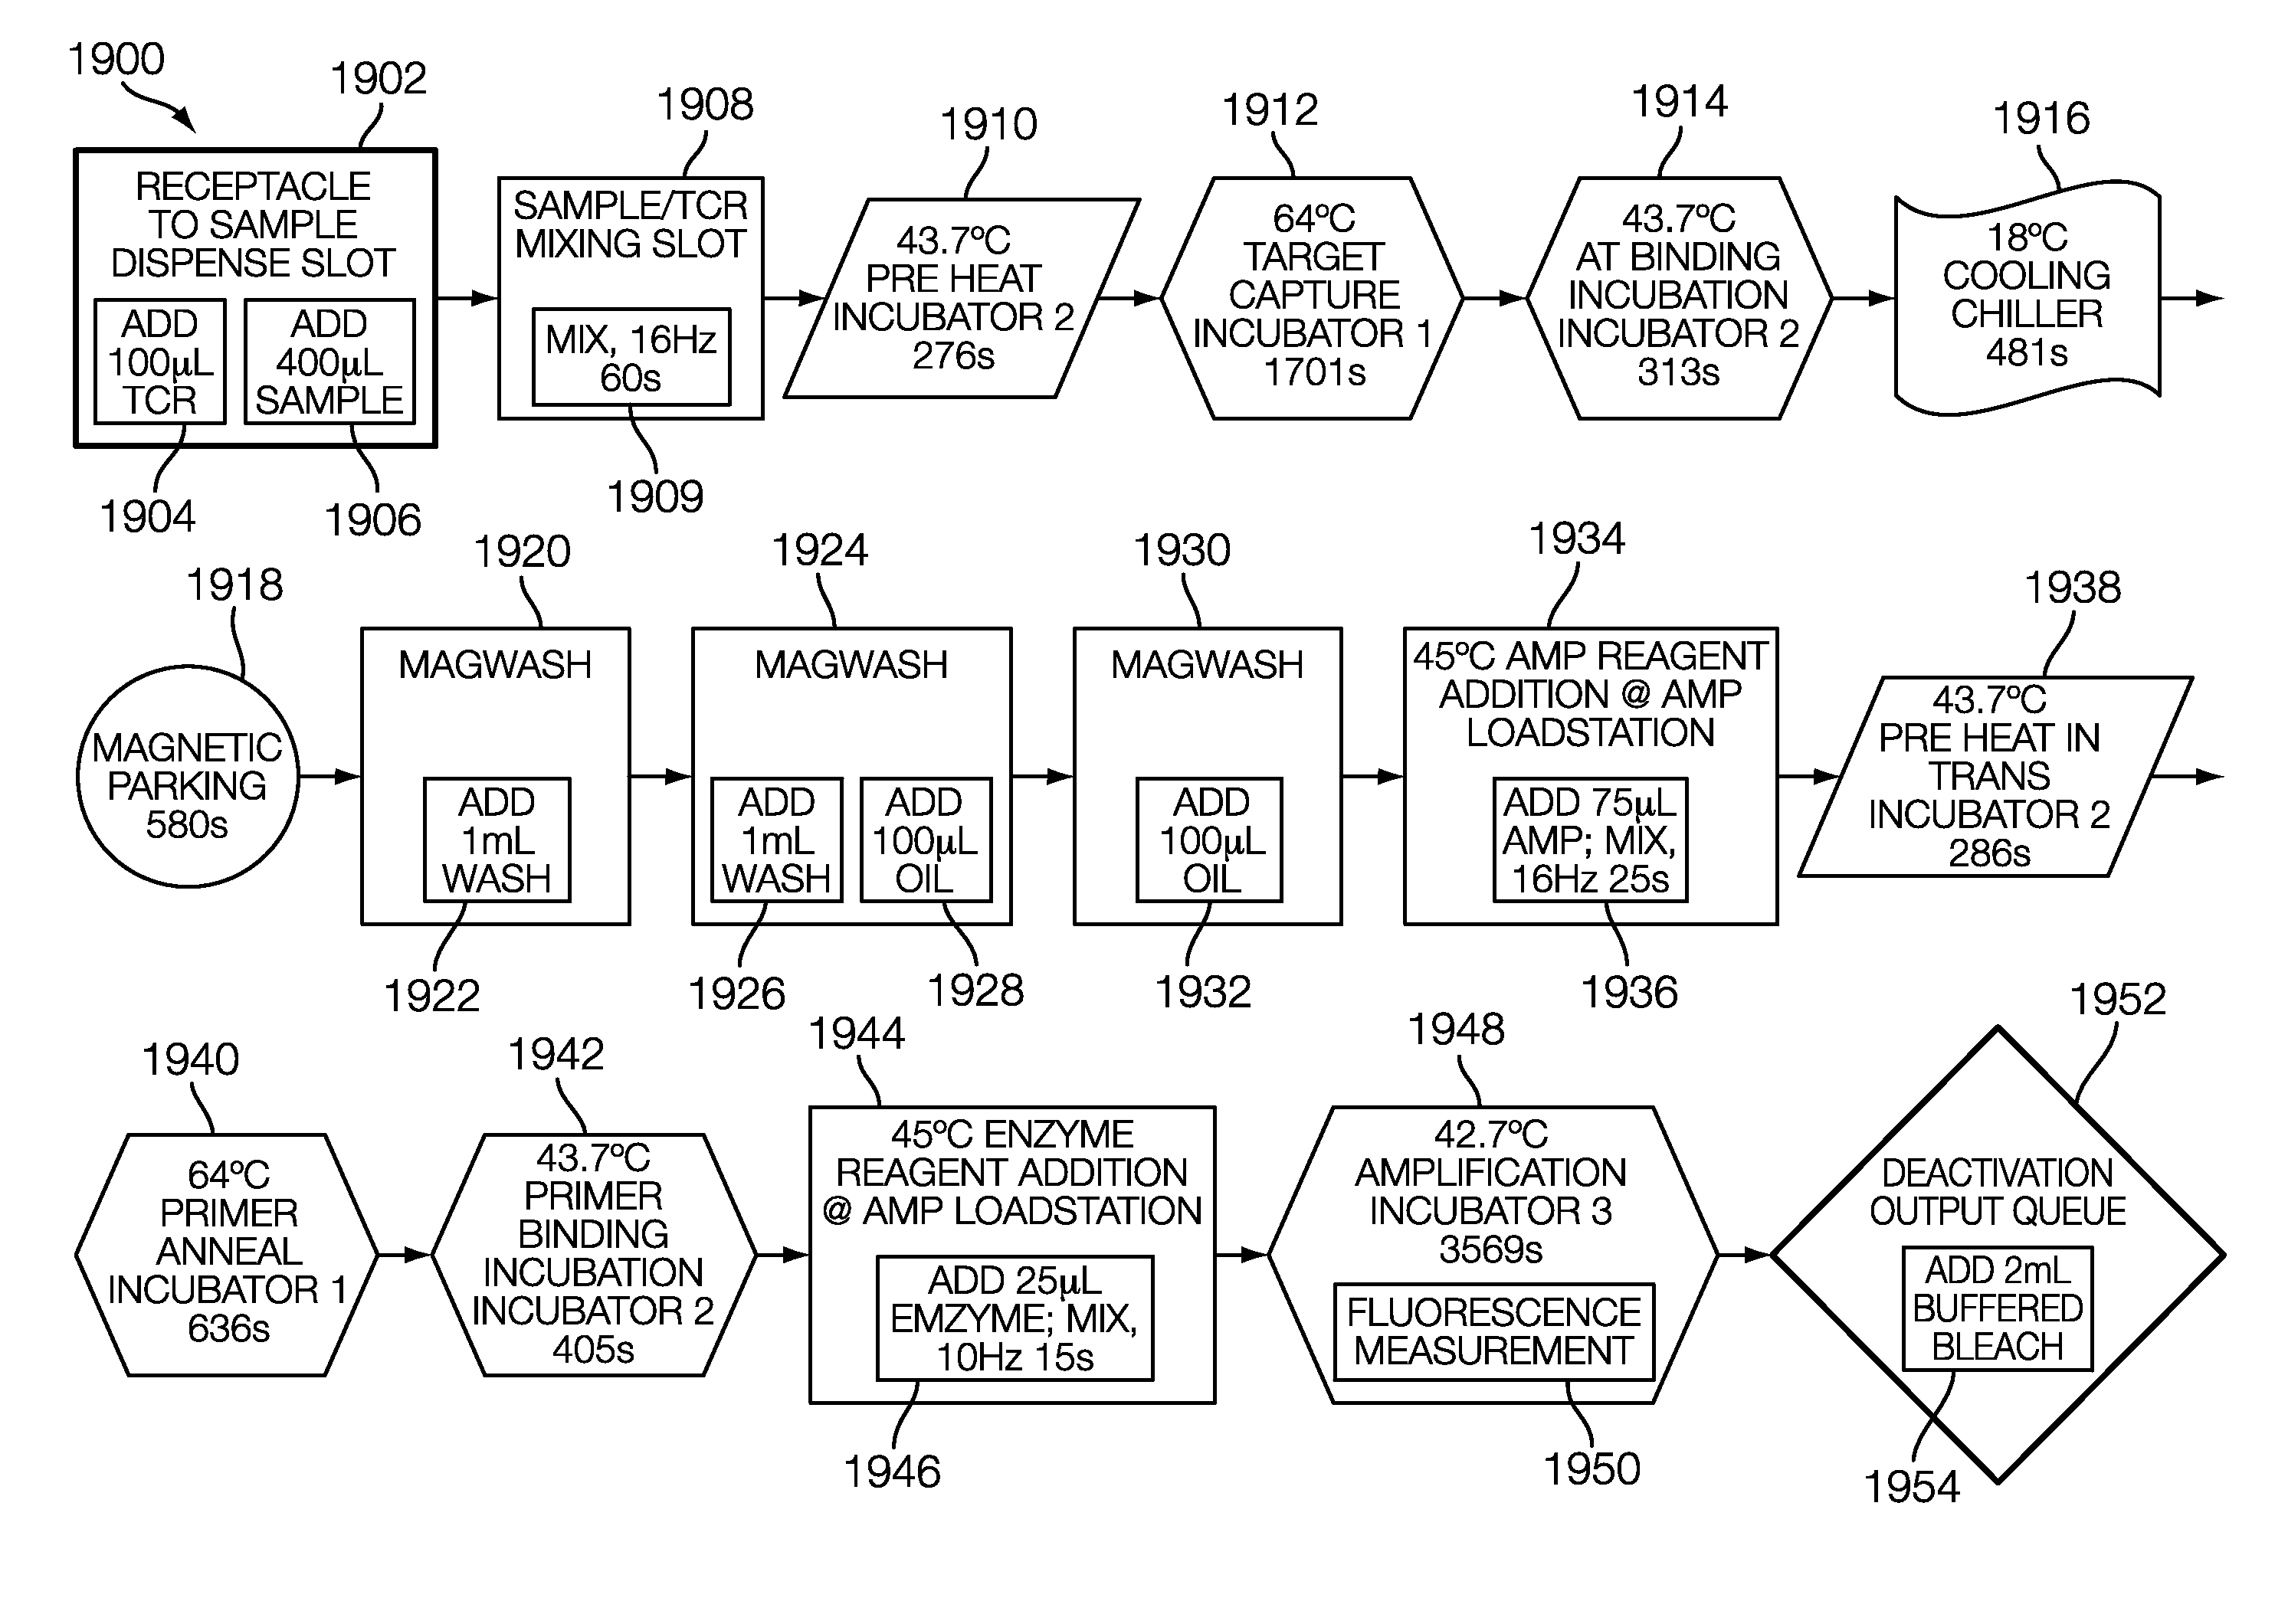 Systems and methods for distinguishing optical signals of different modulation frequencies in an optical signal detector